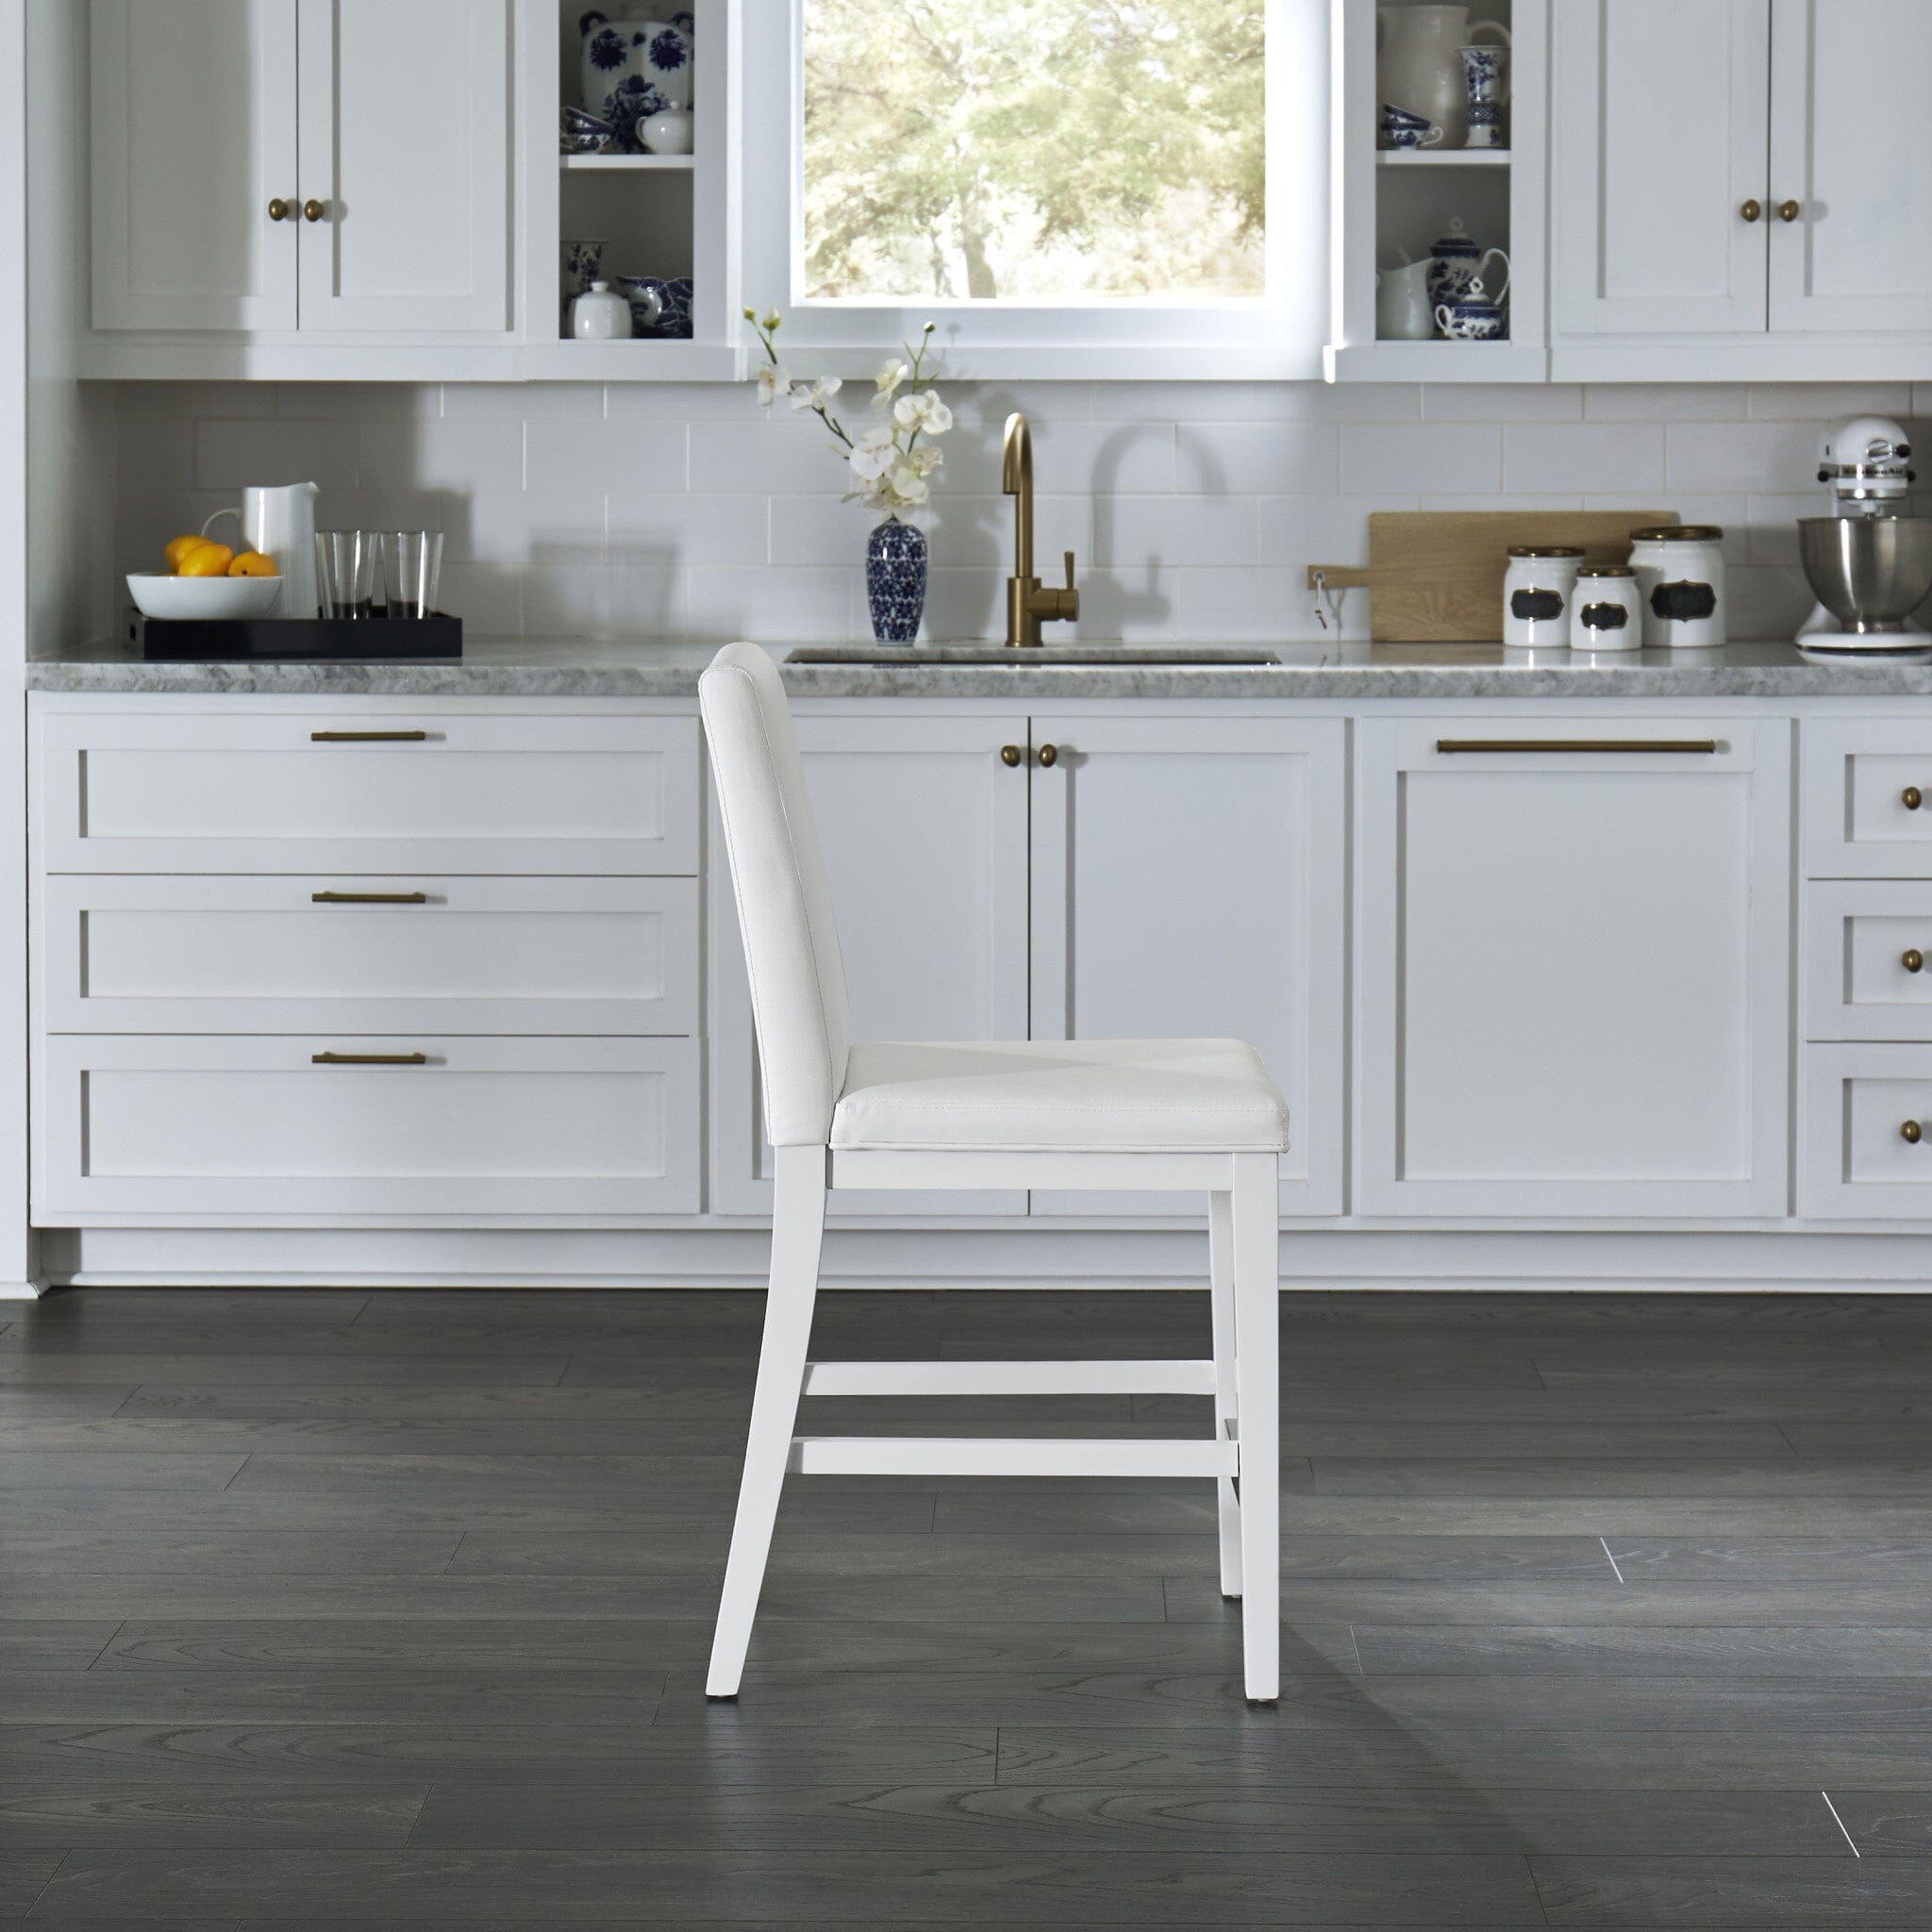 Transitional Counter Stool By Linear Counter Stool Linear